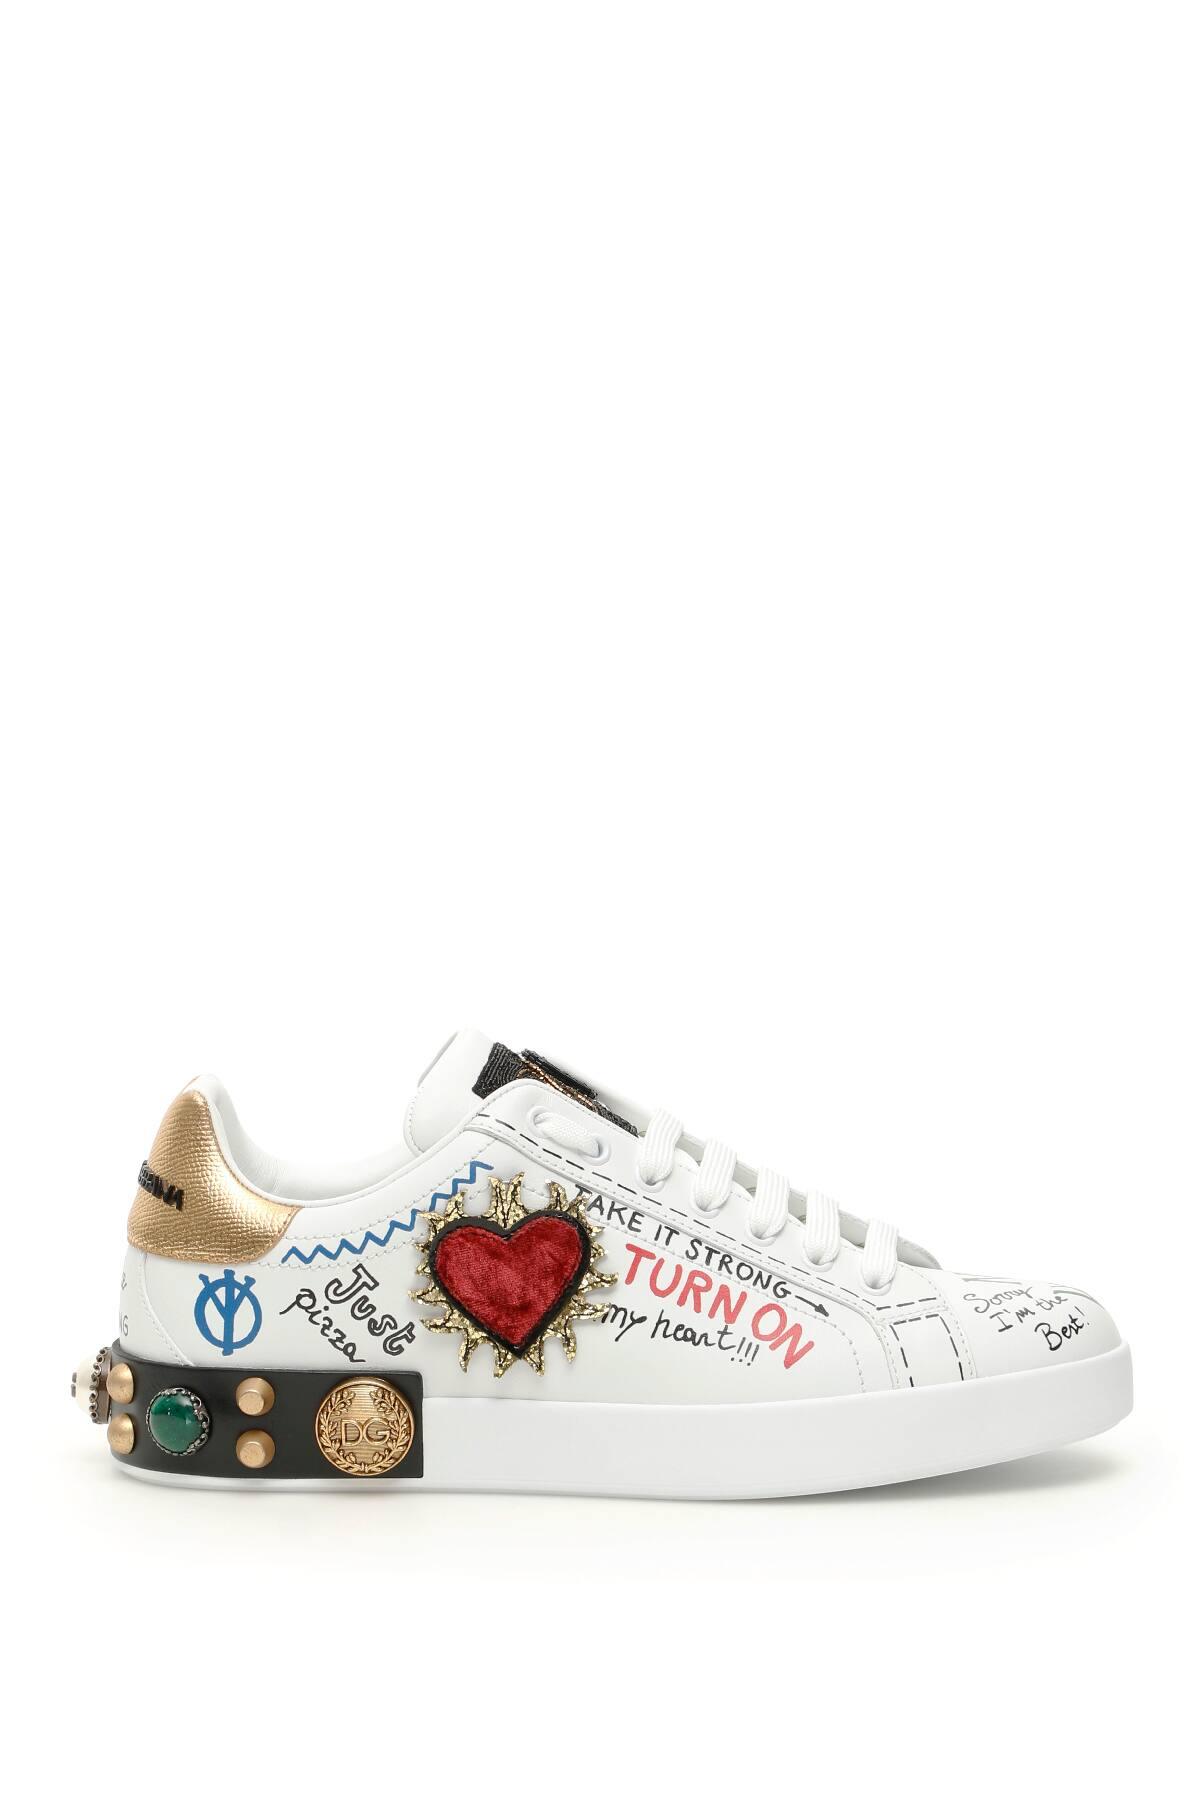 Dolce & Gabbana Leather Printed Calfskin Nappa Portofino Sneakers With  Patch And Embroidery in White for Men - Save 52% | Lyst